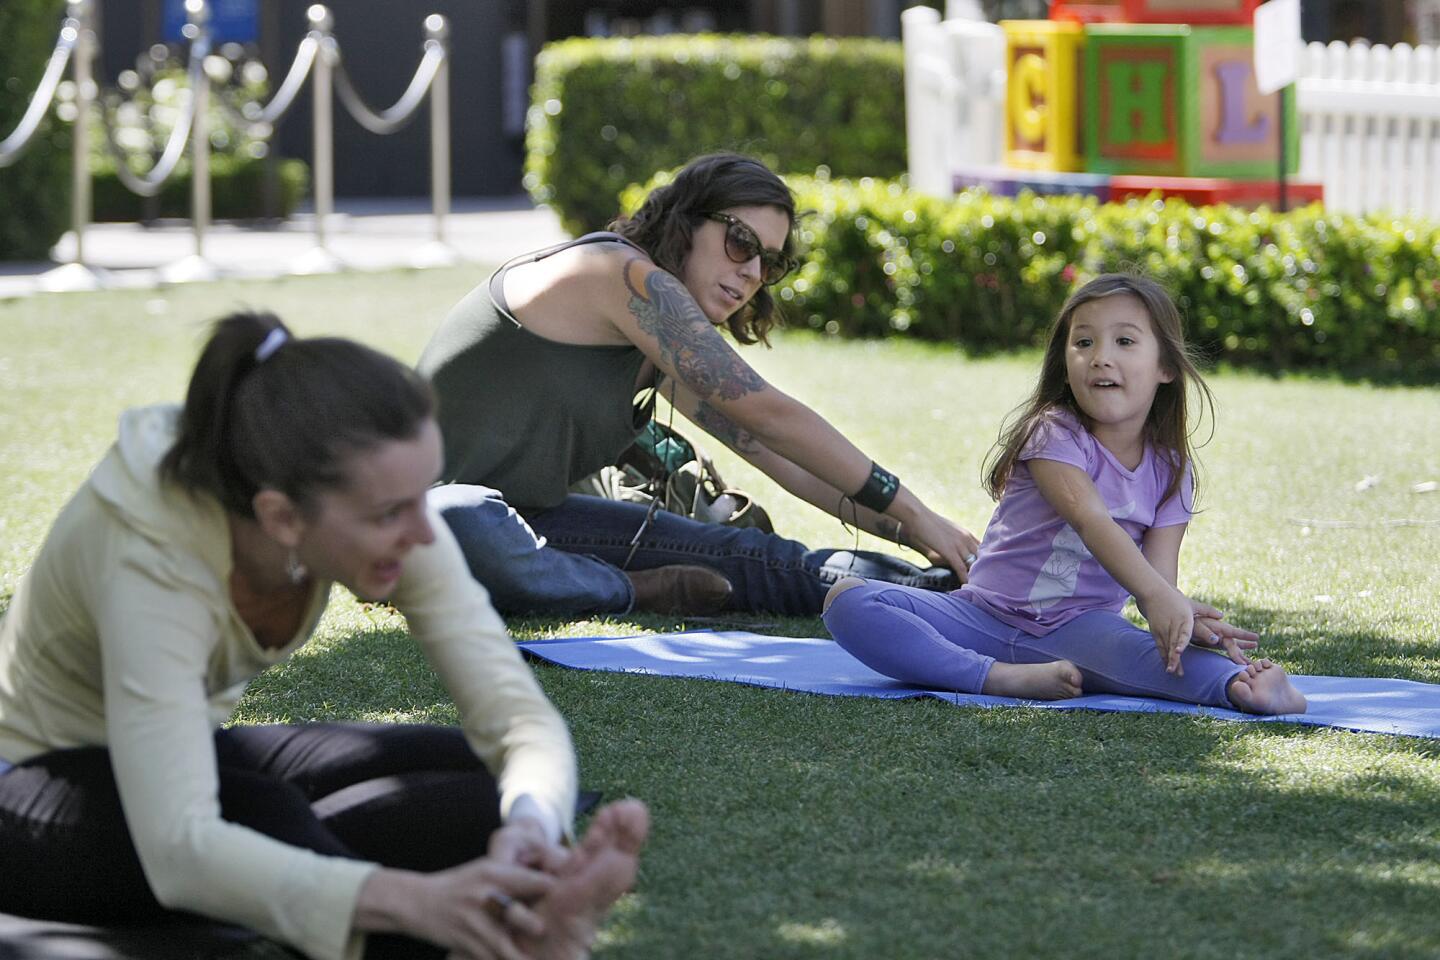 Kala Fernandez, 4 of Glendale, right, and her mom Vivian Fernandez, center, follow instructor Michele Kackovic's instructions in the children's Yoga class on the lawn at the Americana at Brand in Glendale on Wednesday, April 10, 2013. The class began today and will continue once per week until further notice, according to instructor Kackovic.